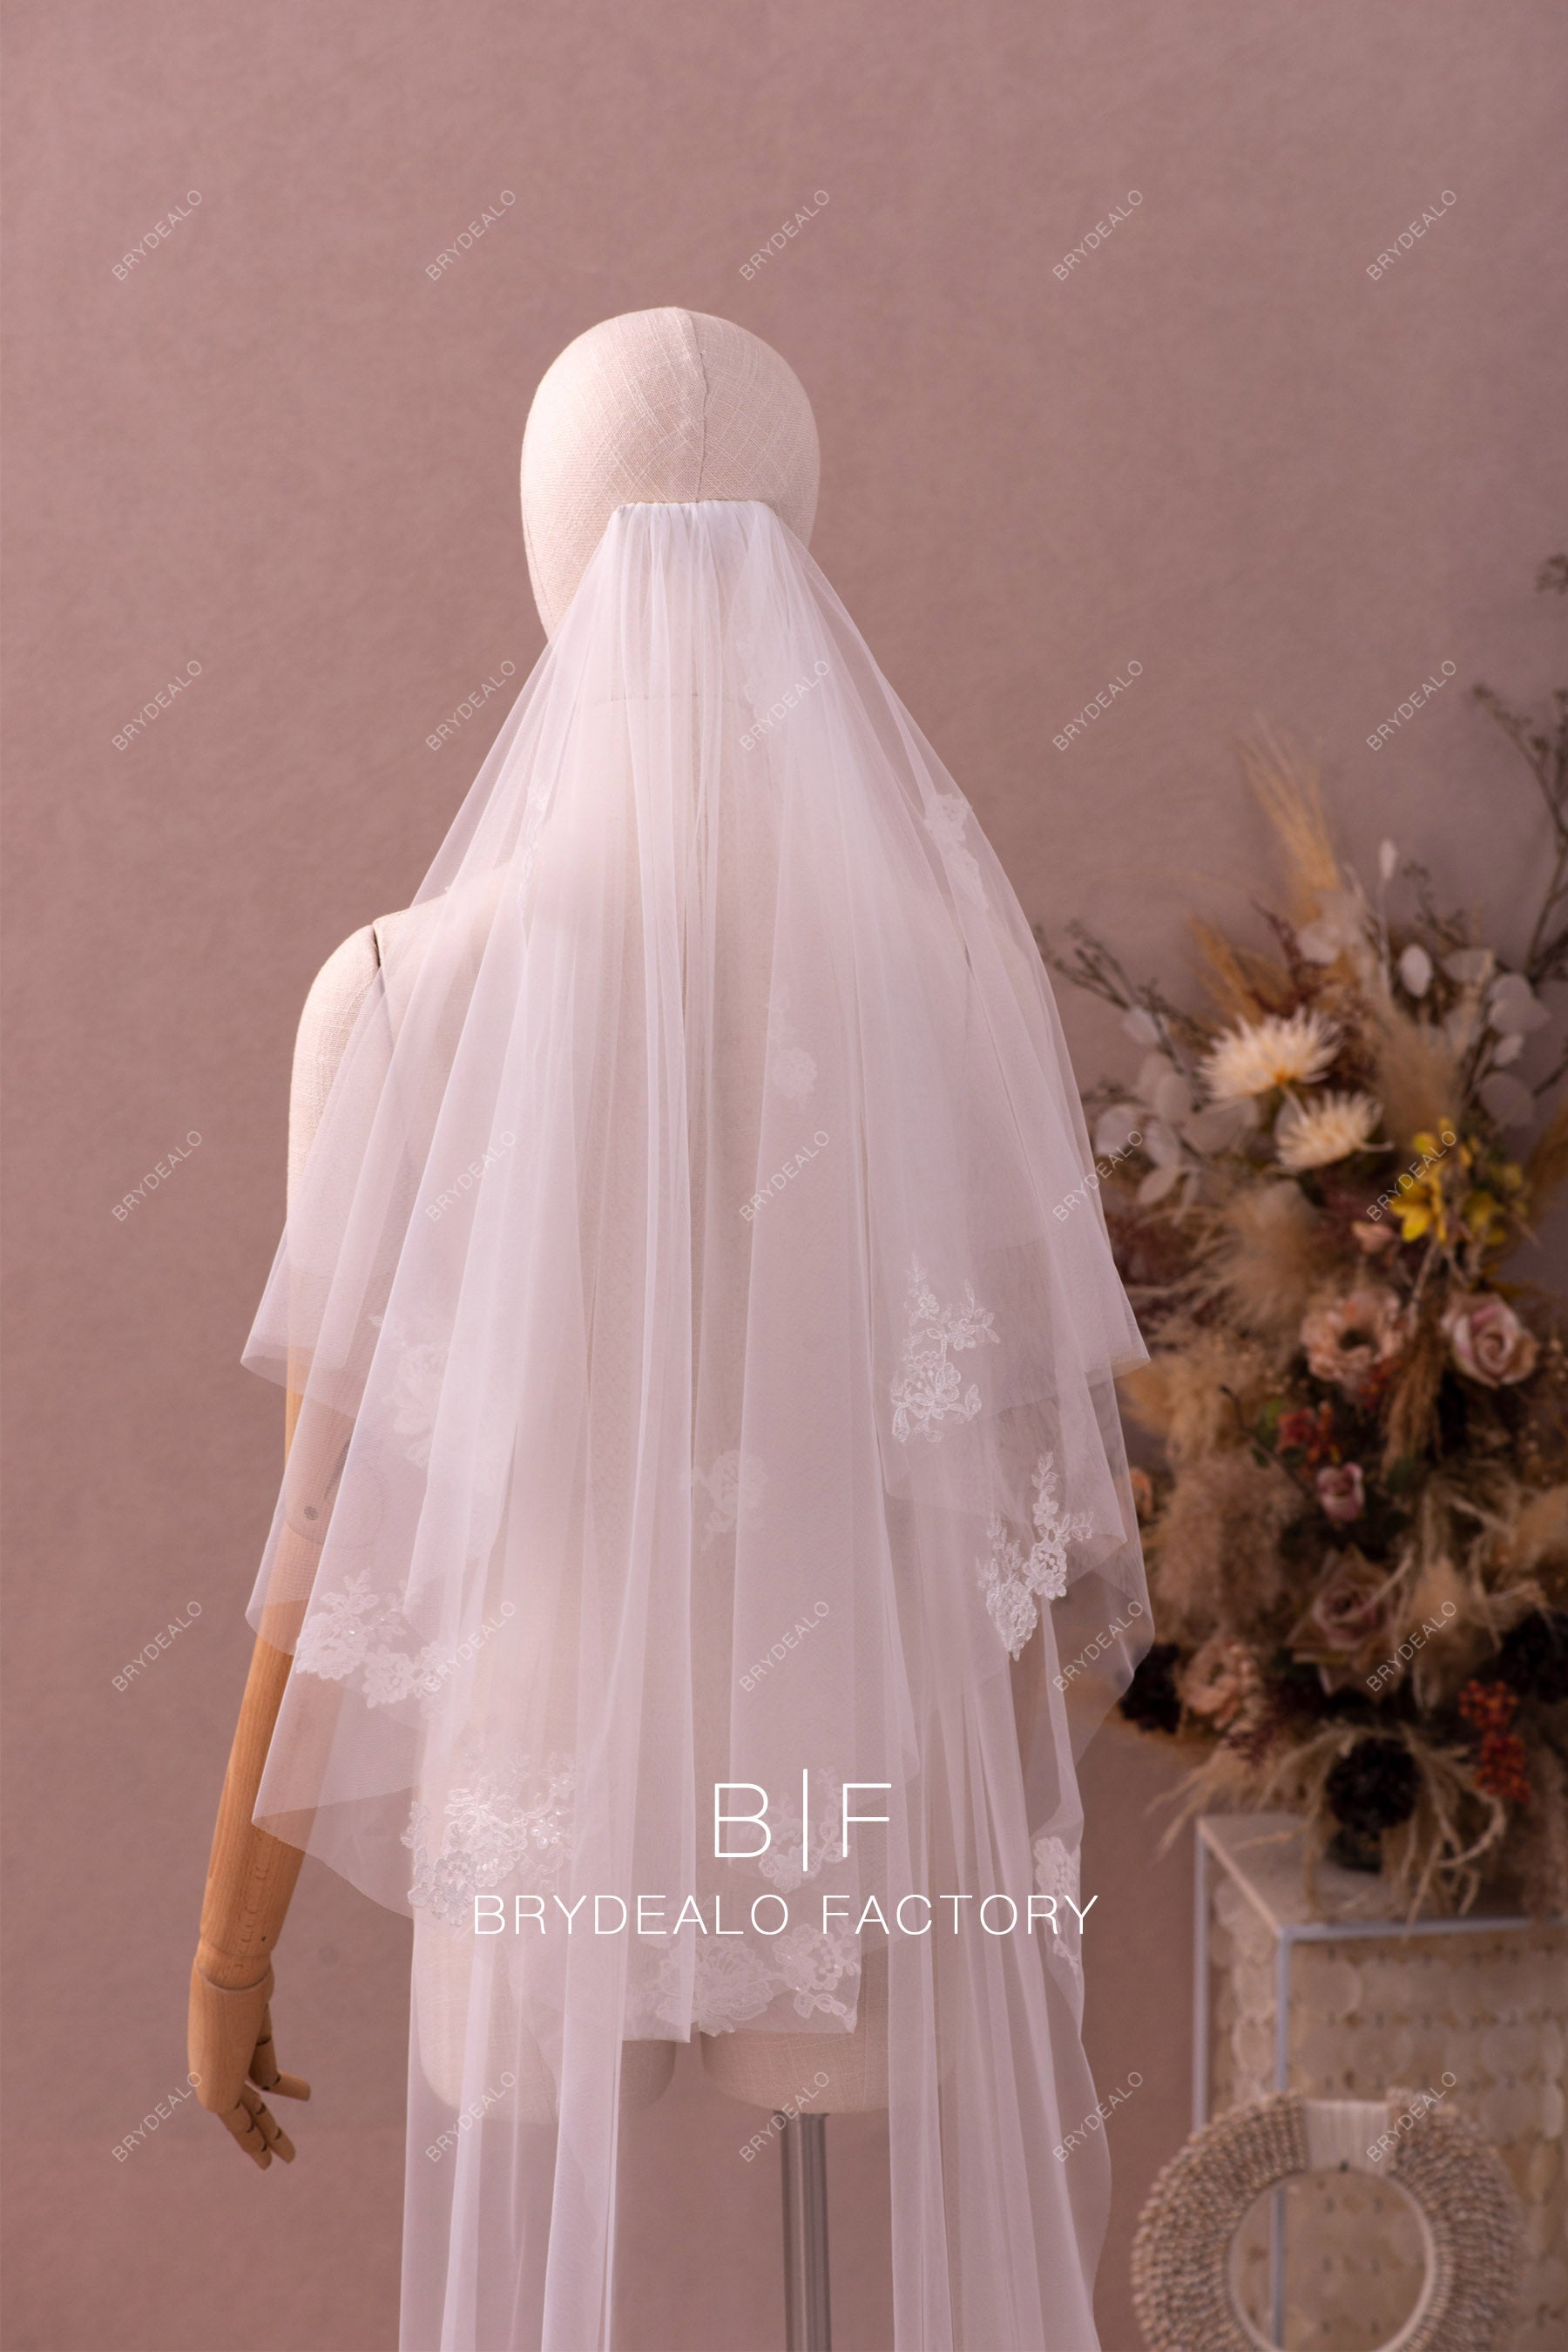 Elegant Two Tier Shimmery Flower Lace Tulle Bridal Veil